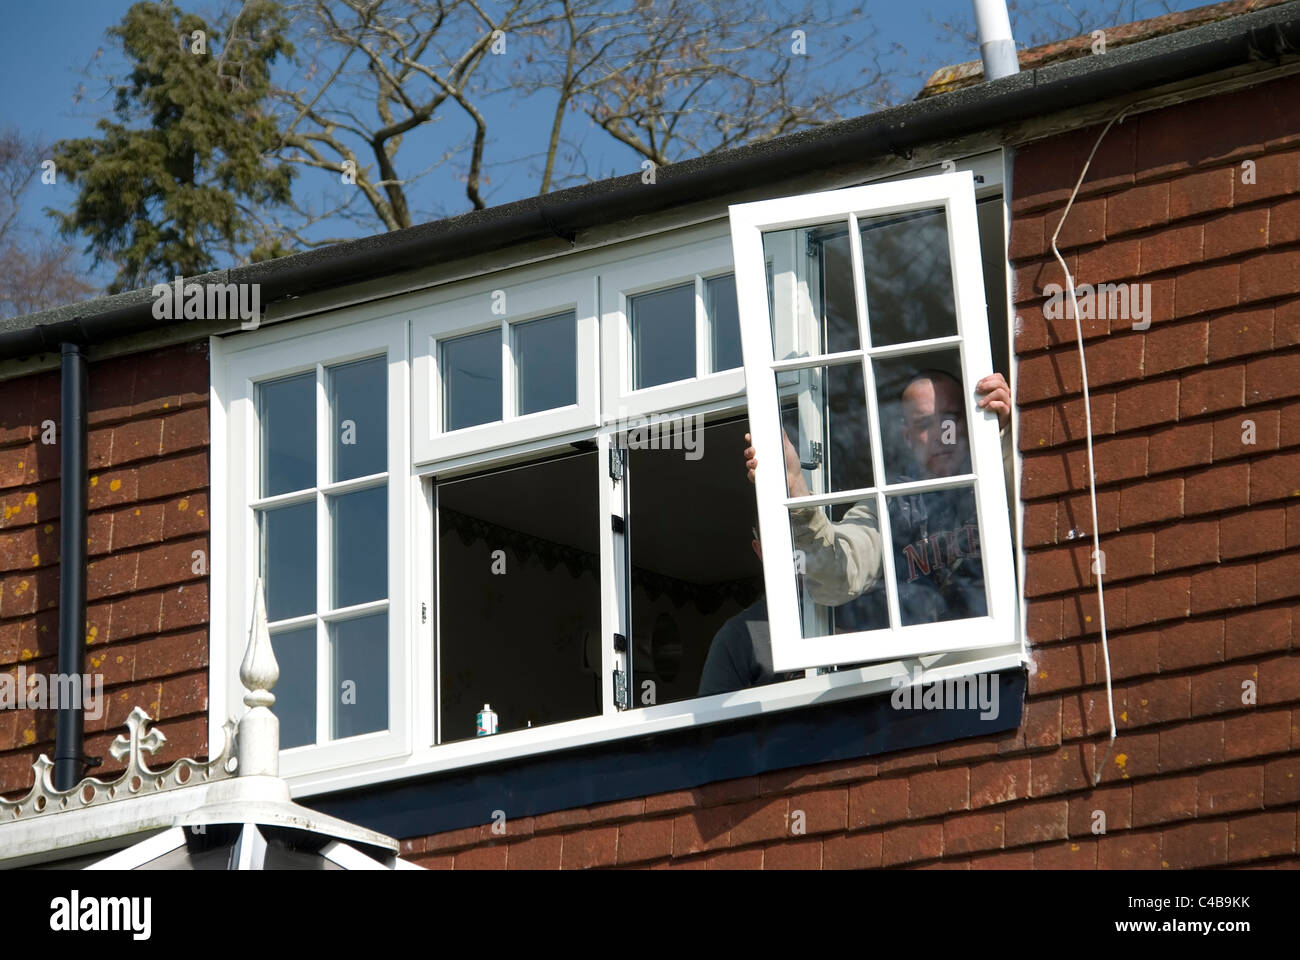 Installing A rated energy efficient replacement double glazed windows on an old house to improve energy efficiency Stock Photo